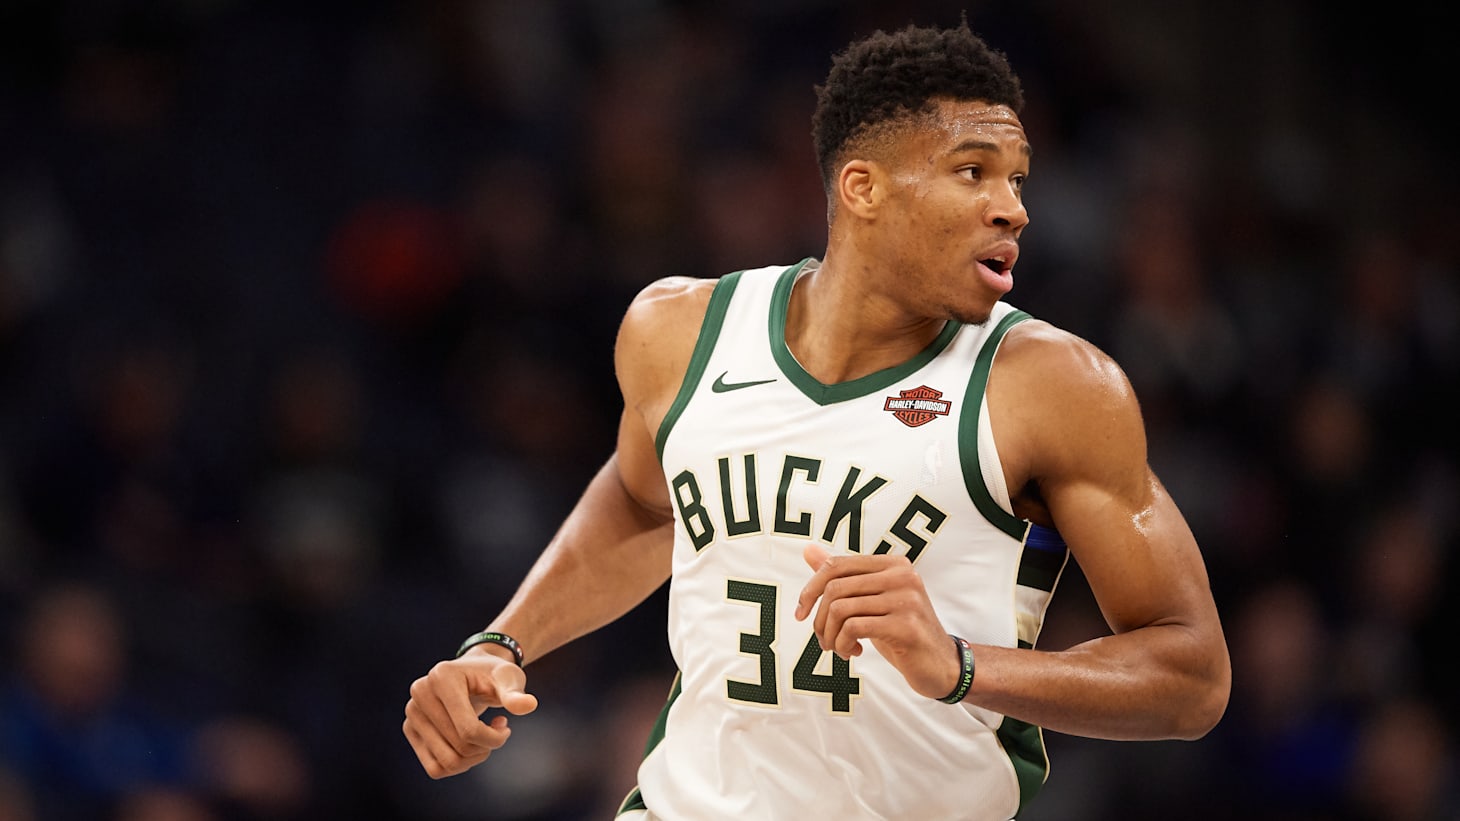 Giannis Antetokounmpo: From poverty in Greece to NBA's most lucrative player